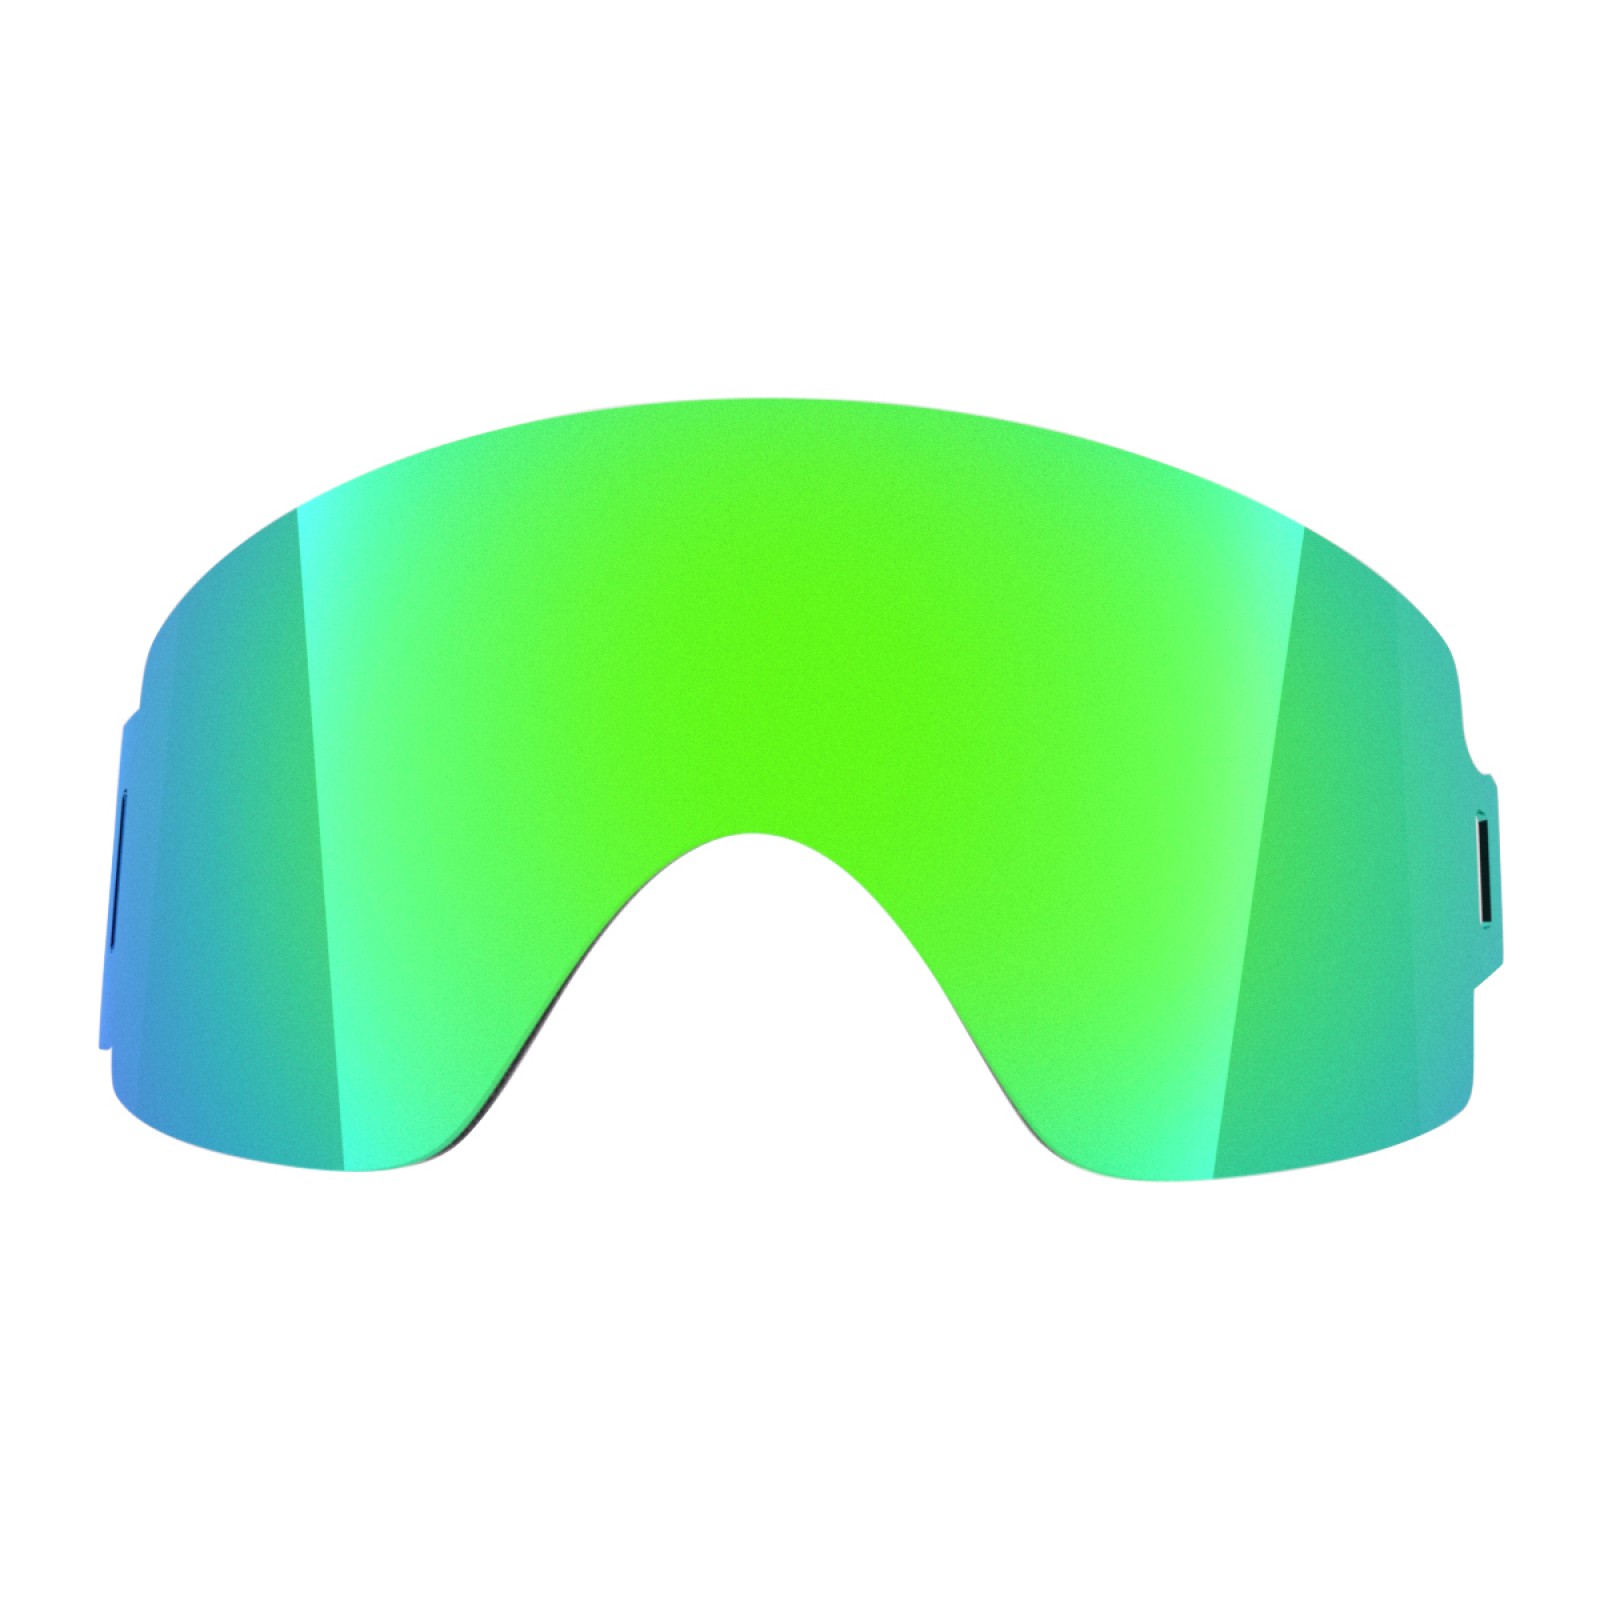 Green MCI lens for Shift goggle